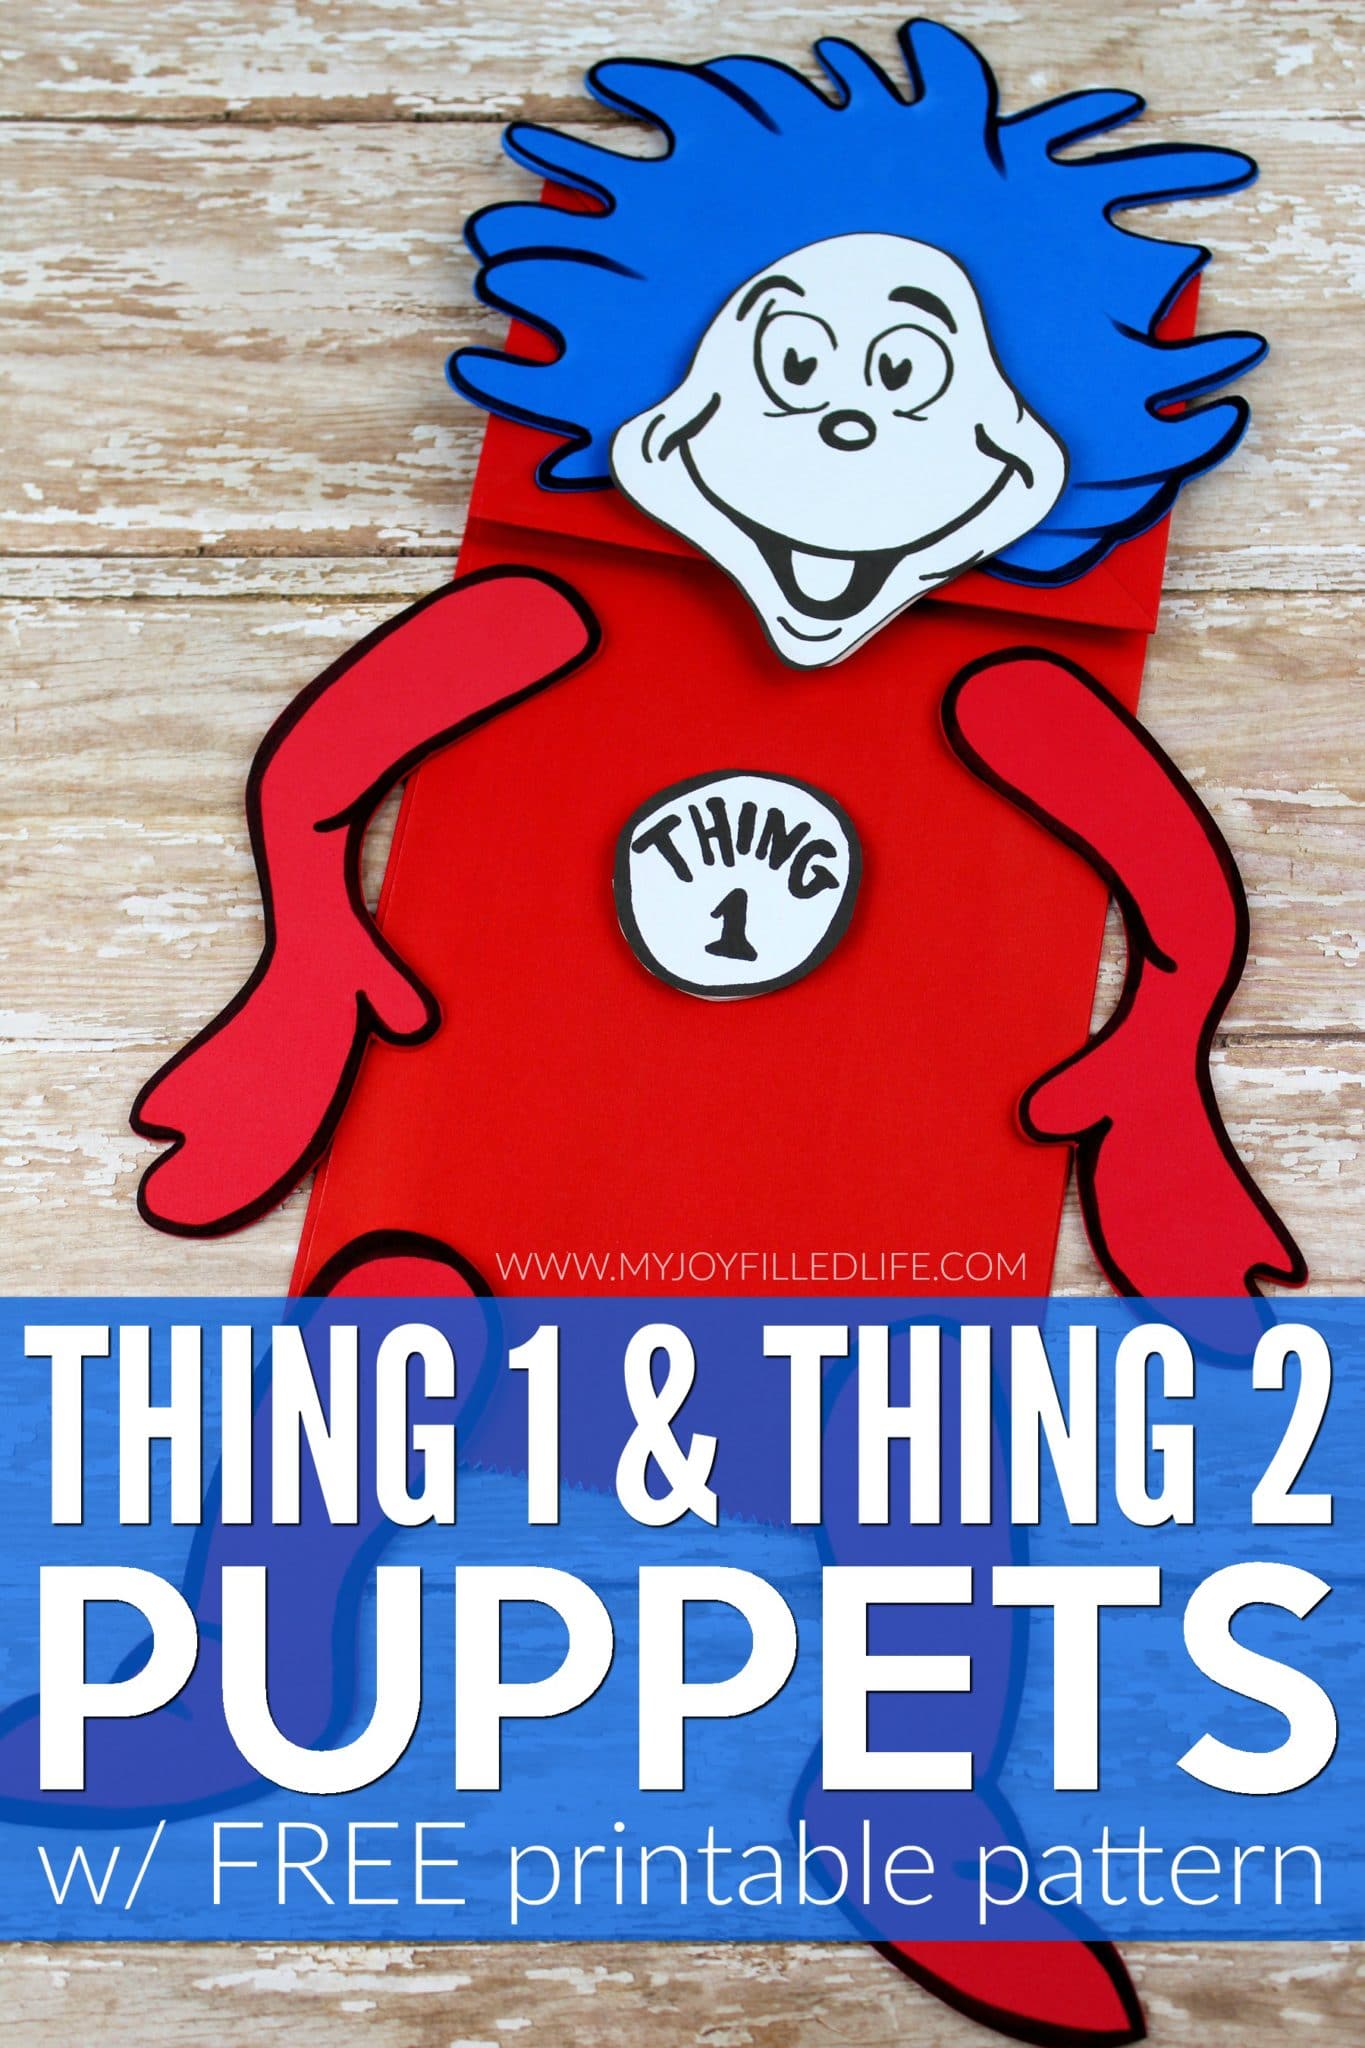 Make your next reading of The Cat and the Hat more fun and memorable with these cute Thing 1 & Thing 2 puppets! #drseuss #kidcrafts #storytime